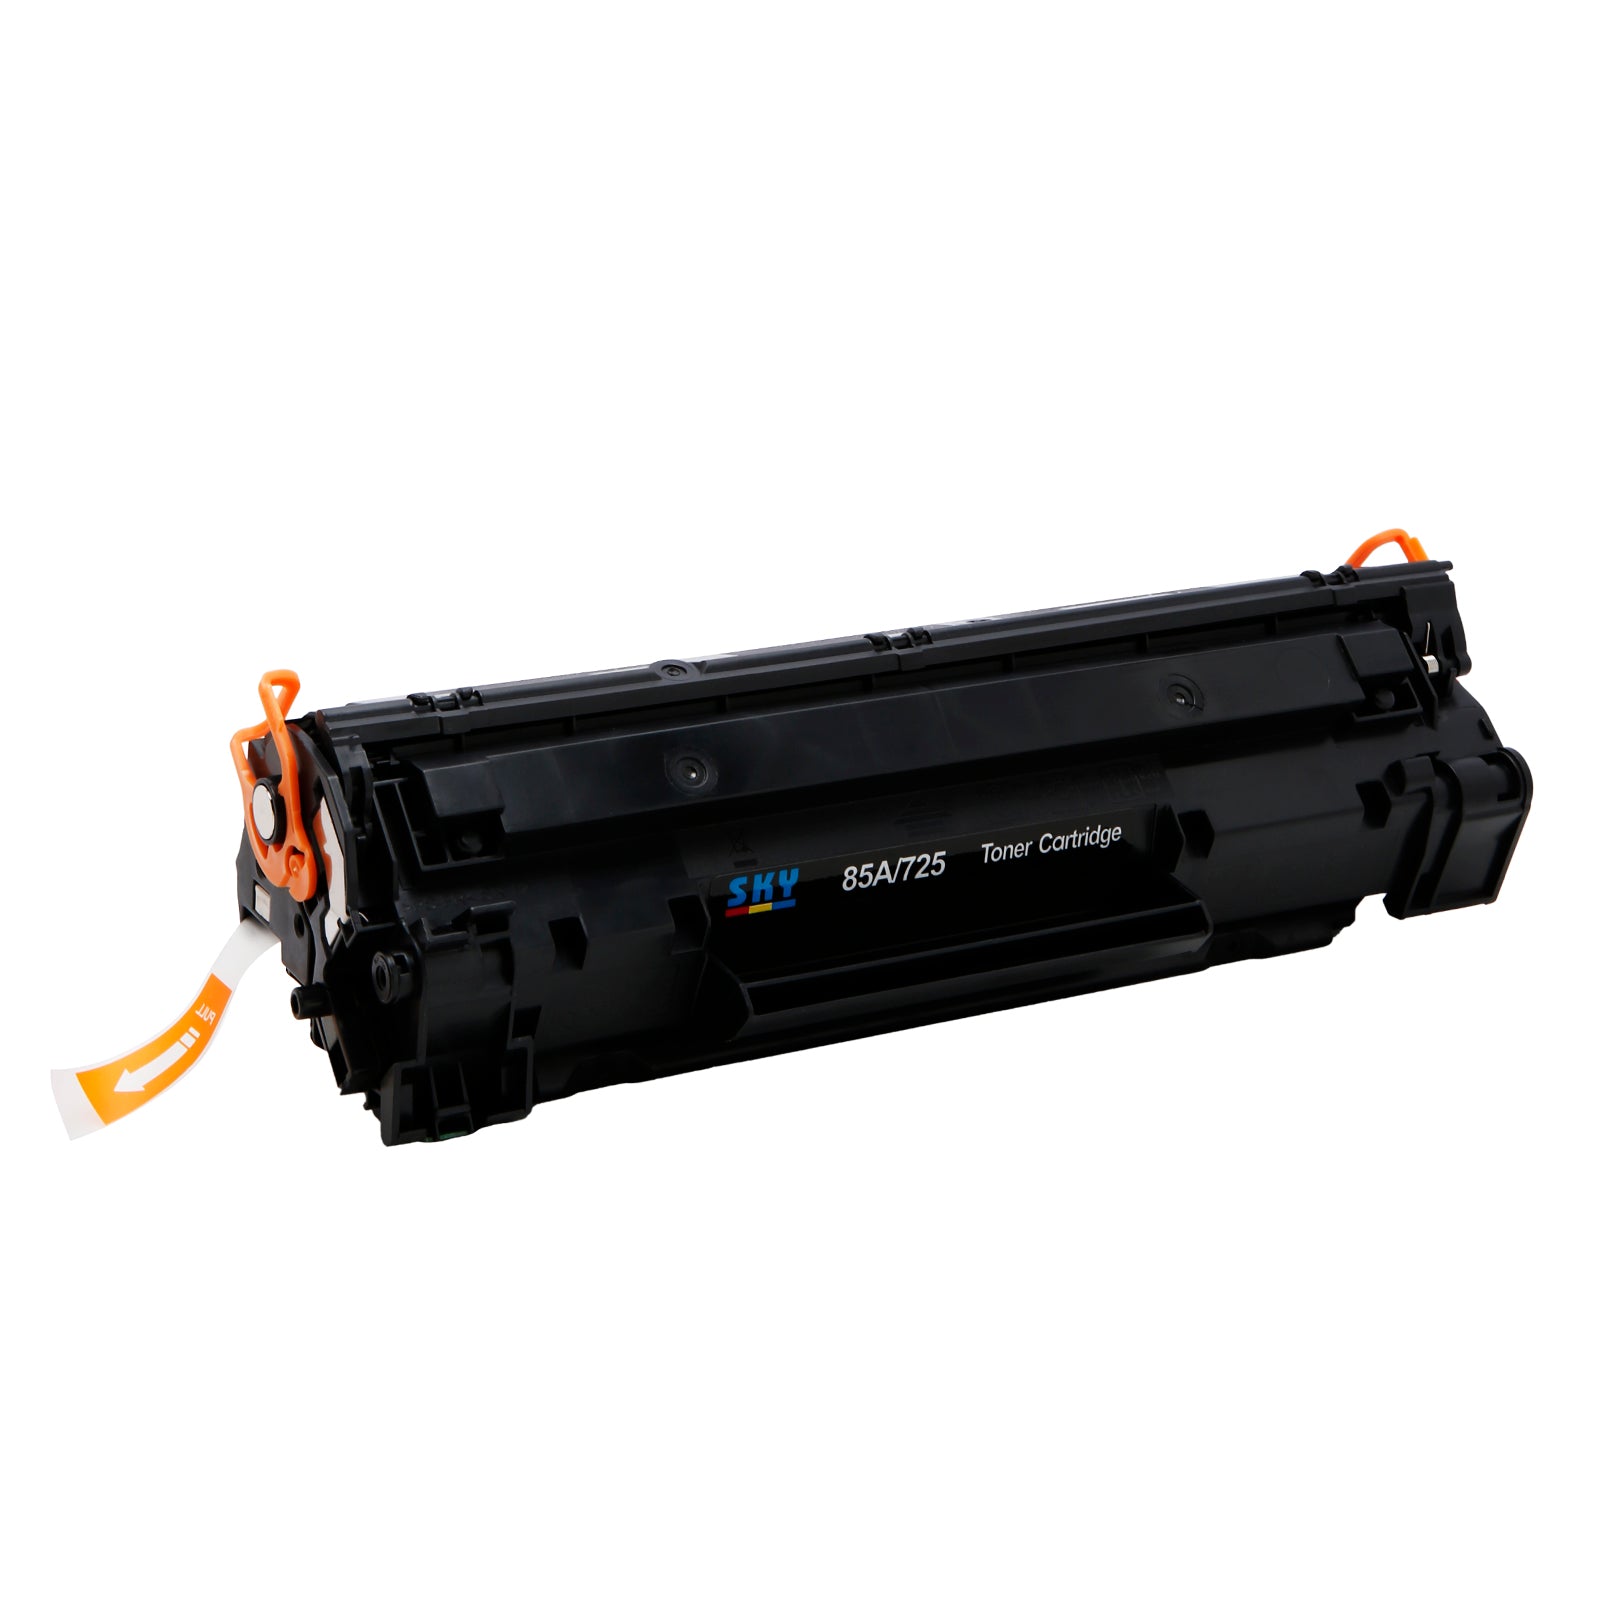 SKY 85A Toner Cartridge CE285A for P1102 and M1132 and M1212 printers